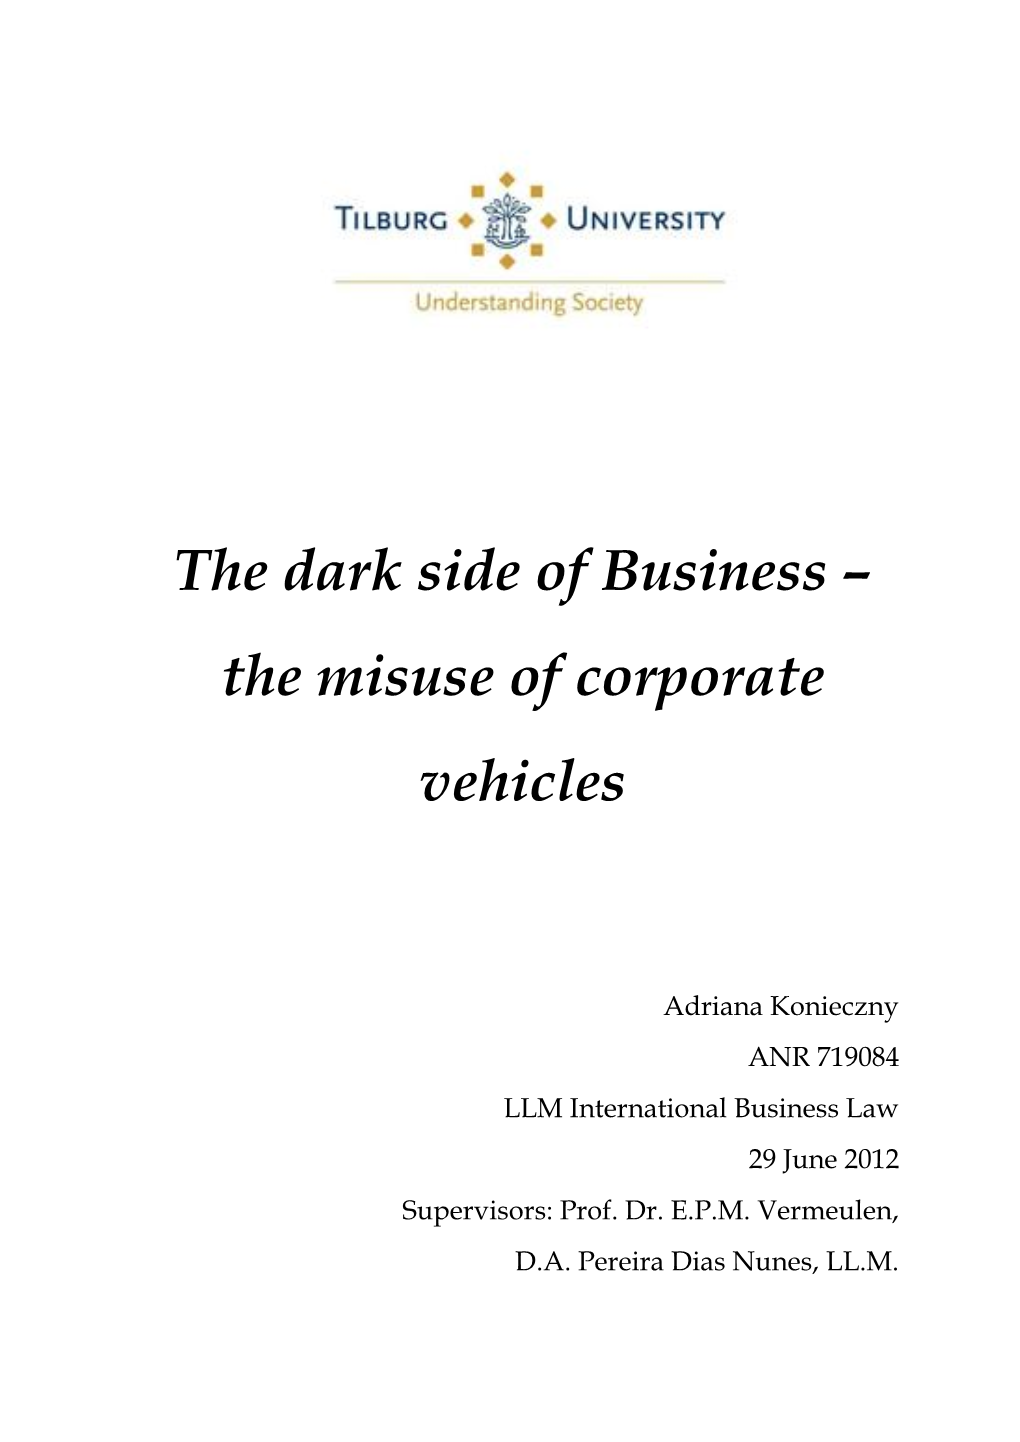 The Dark Side of Business – the Misuse of Corporate Vehicles